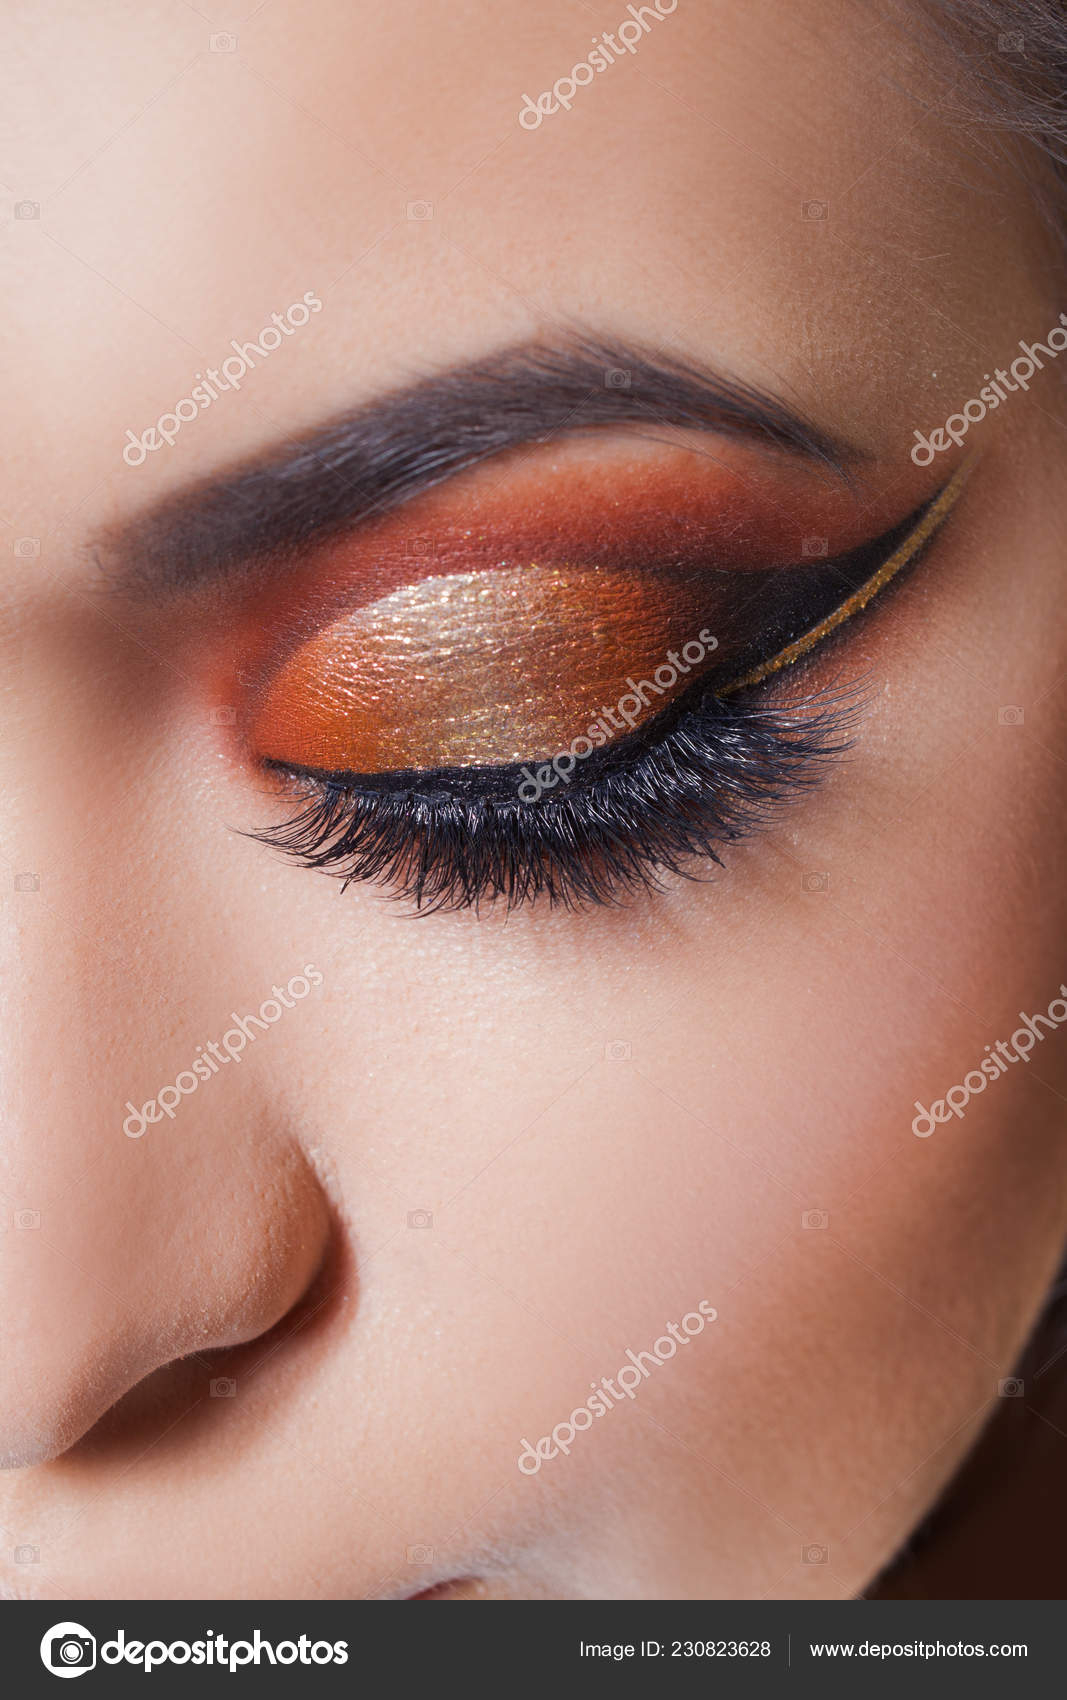 Amazing Eye Makeup Amazing Bright Eye Makeup With A Spectacular Arrow Brown And Gold